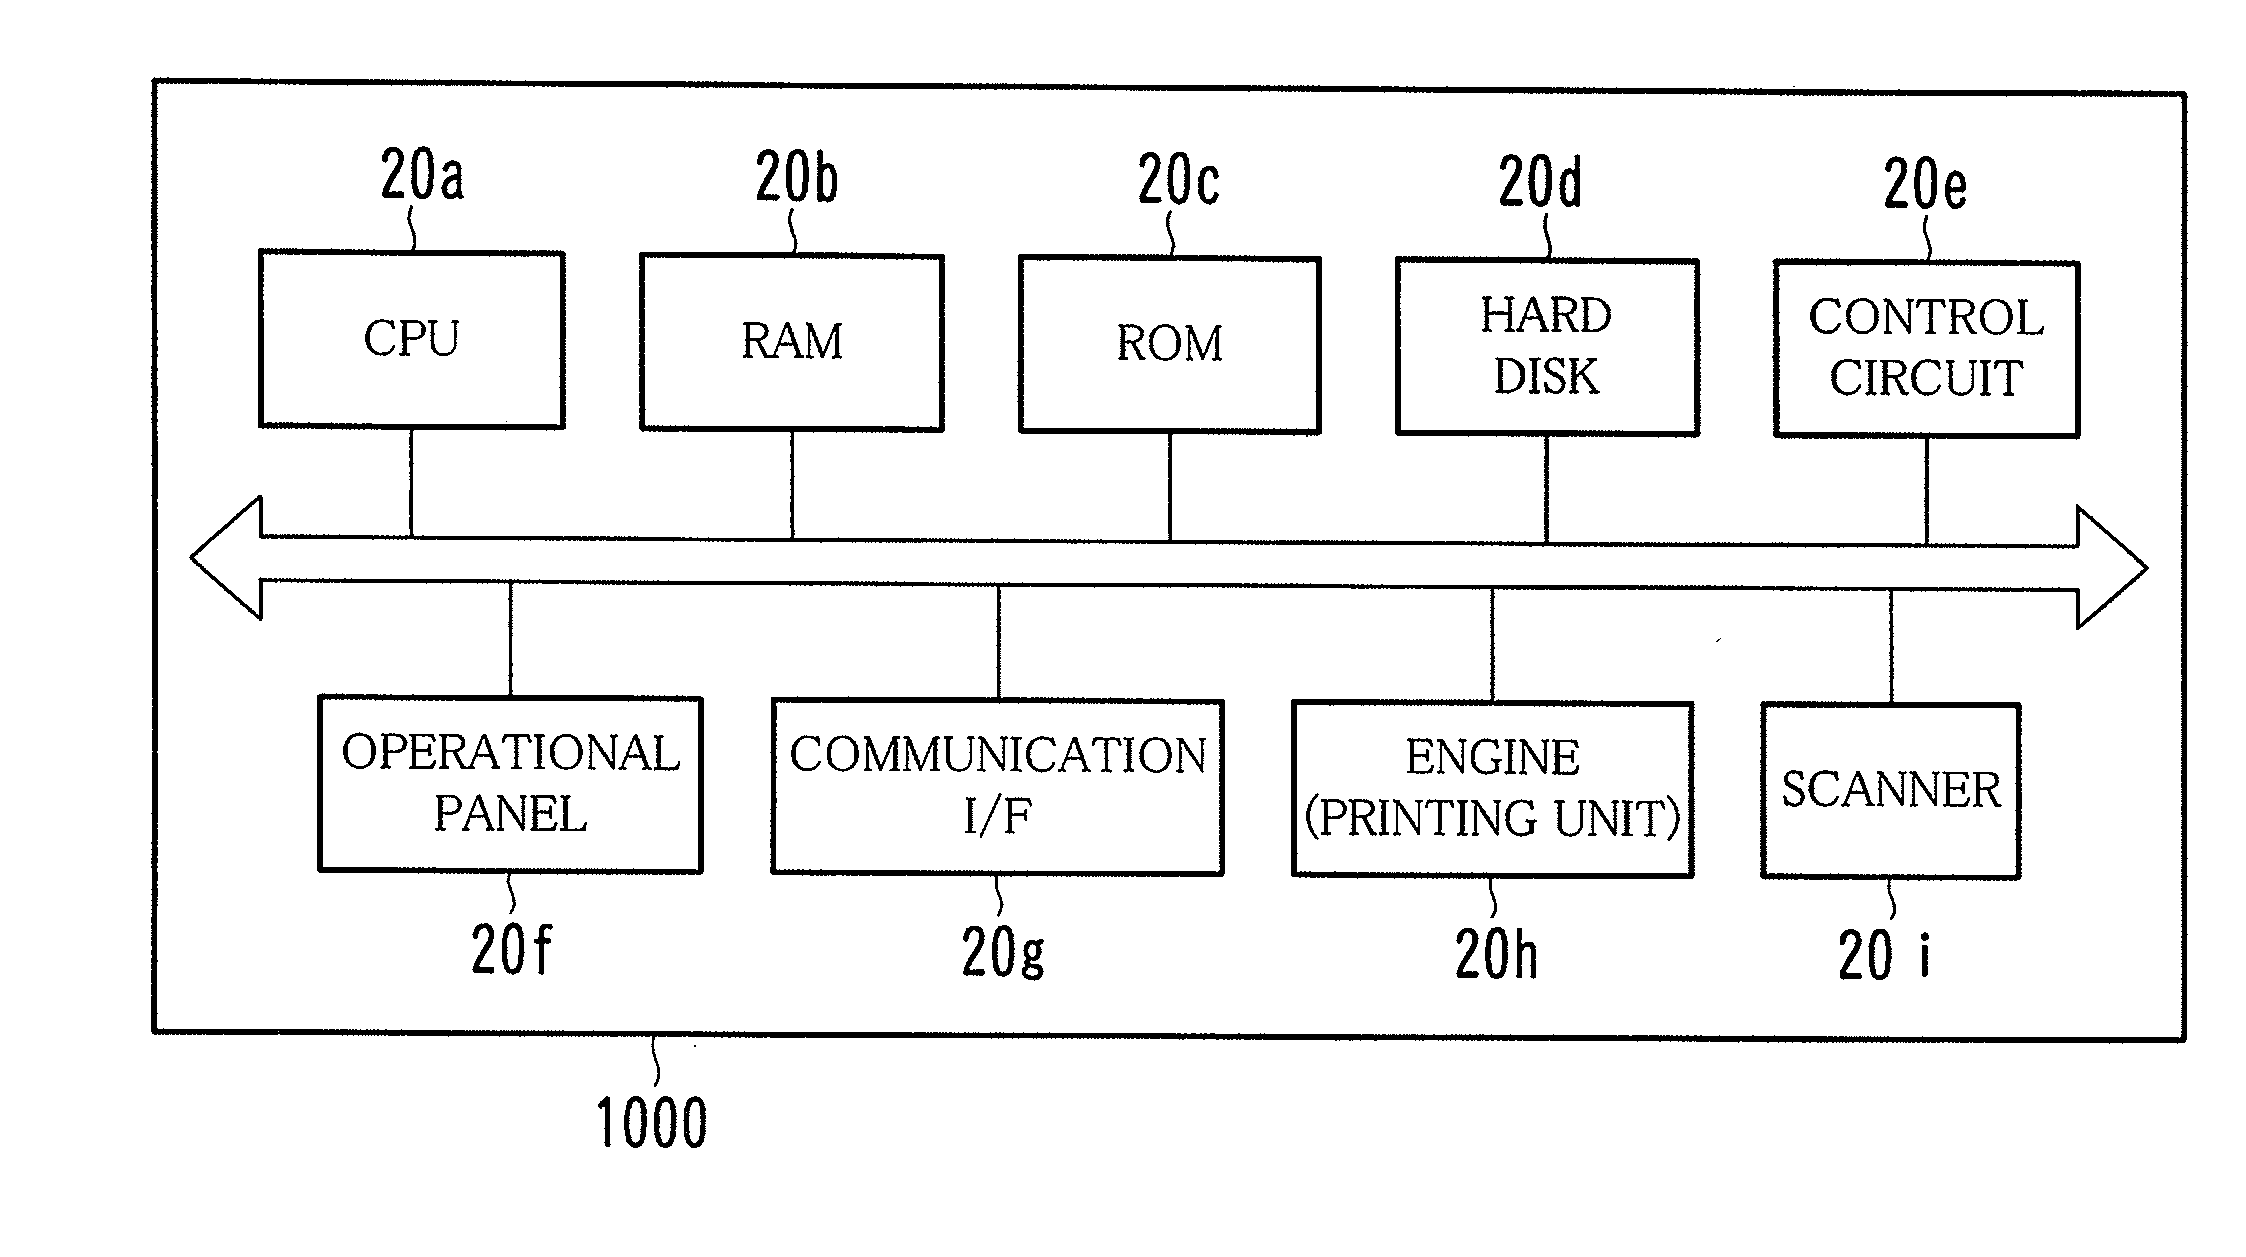 Image processing apparatus, method for displaying interface screen, and computer-readable storage medium for computer program